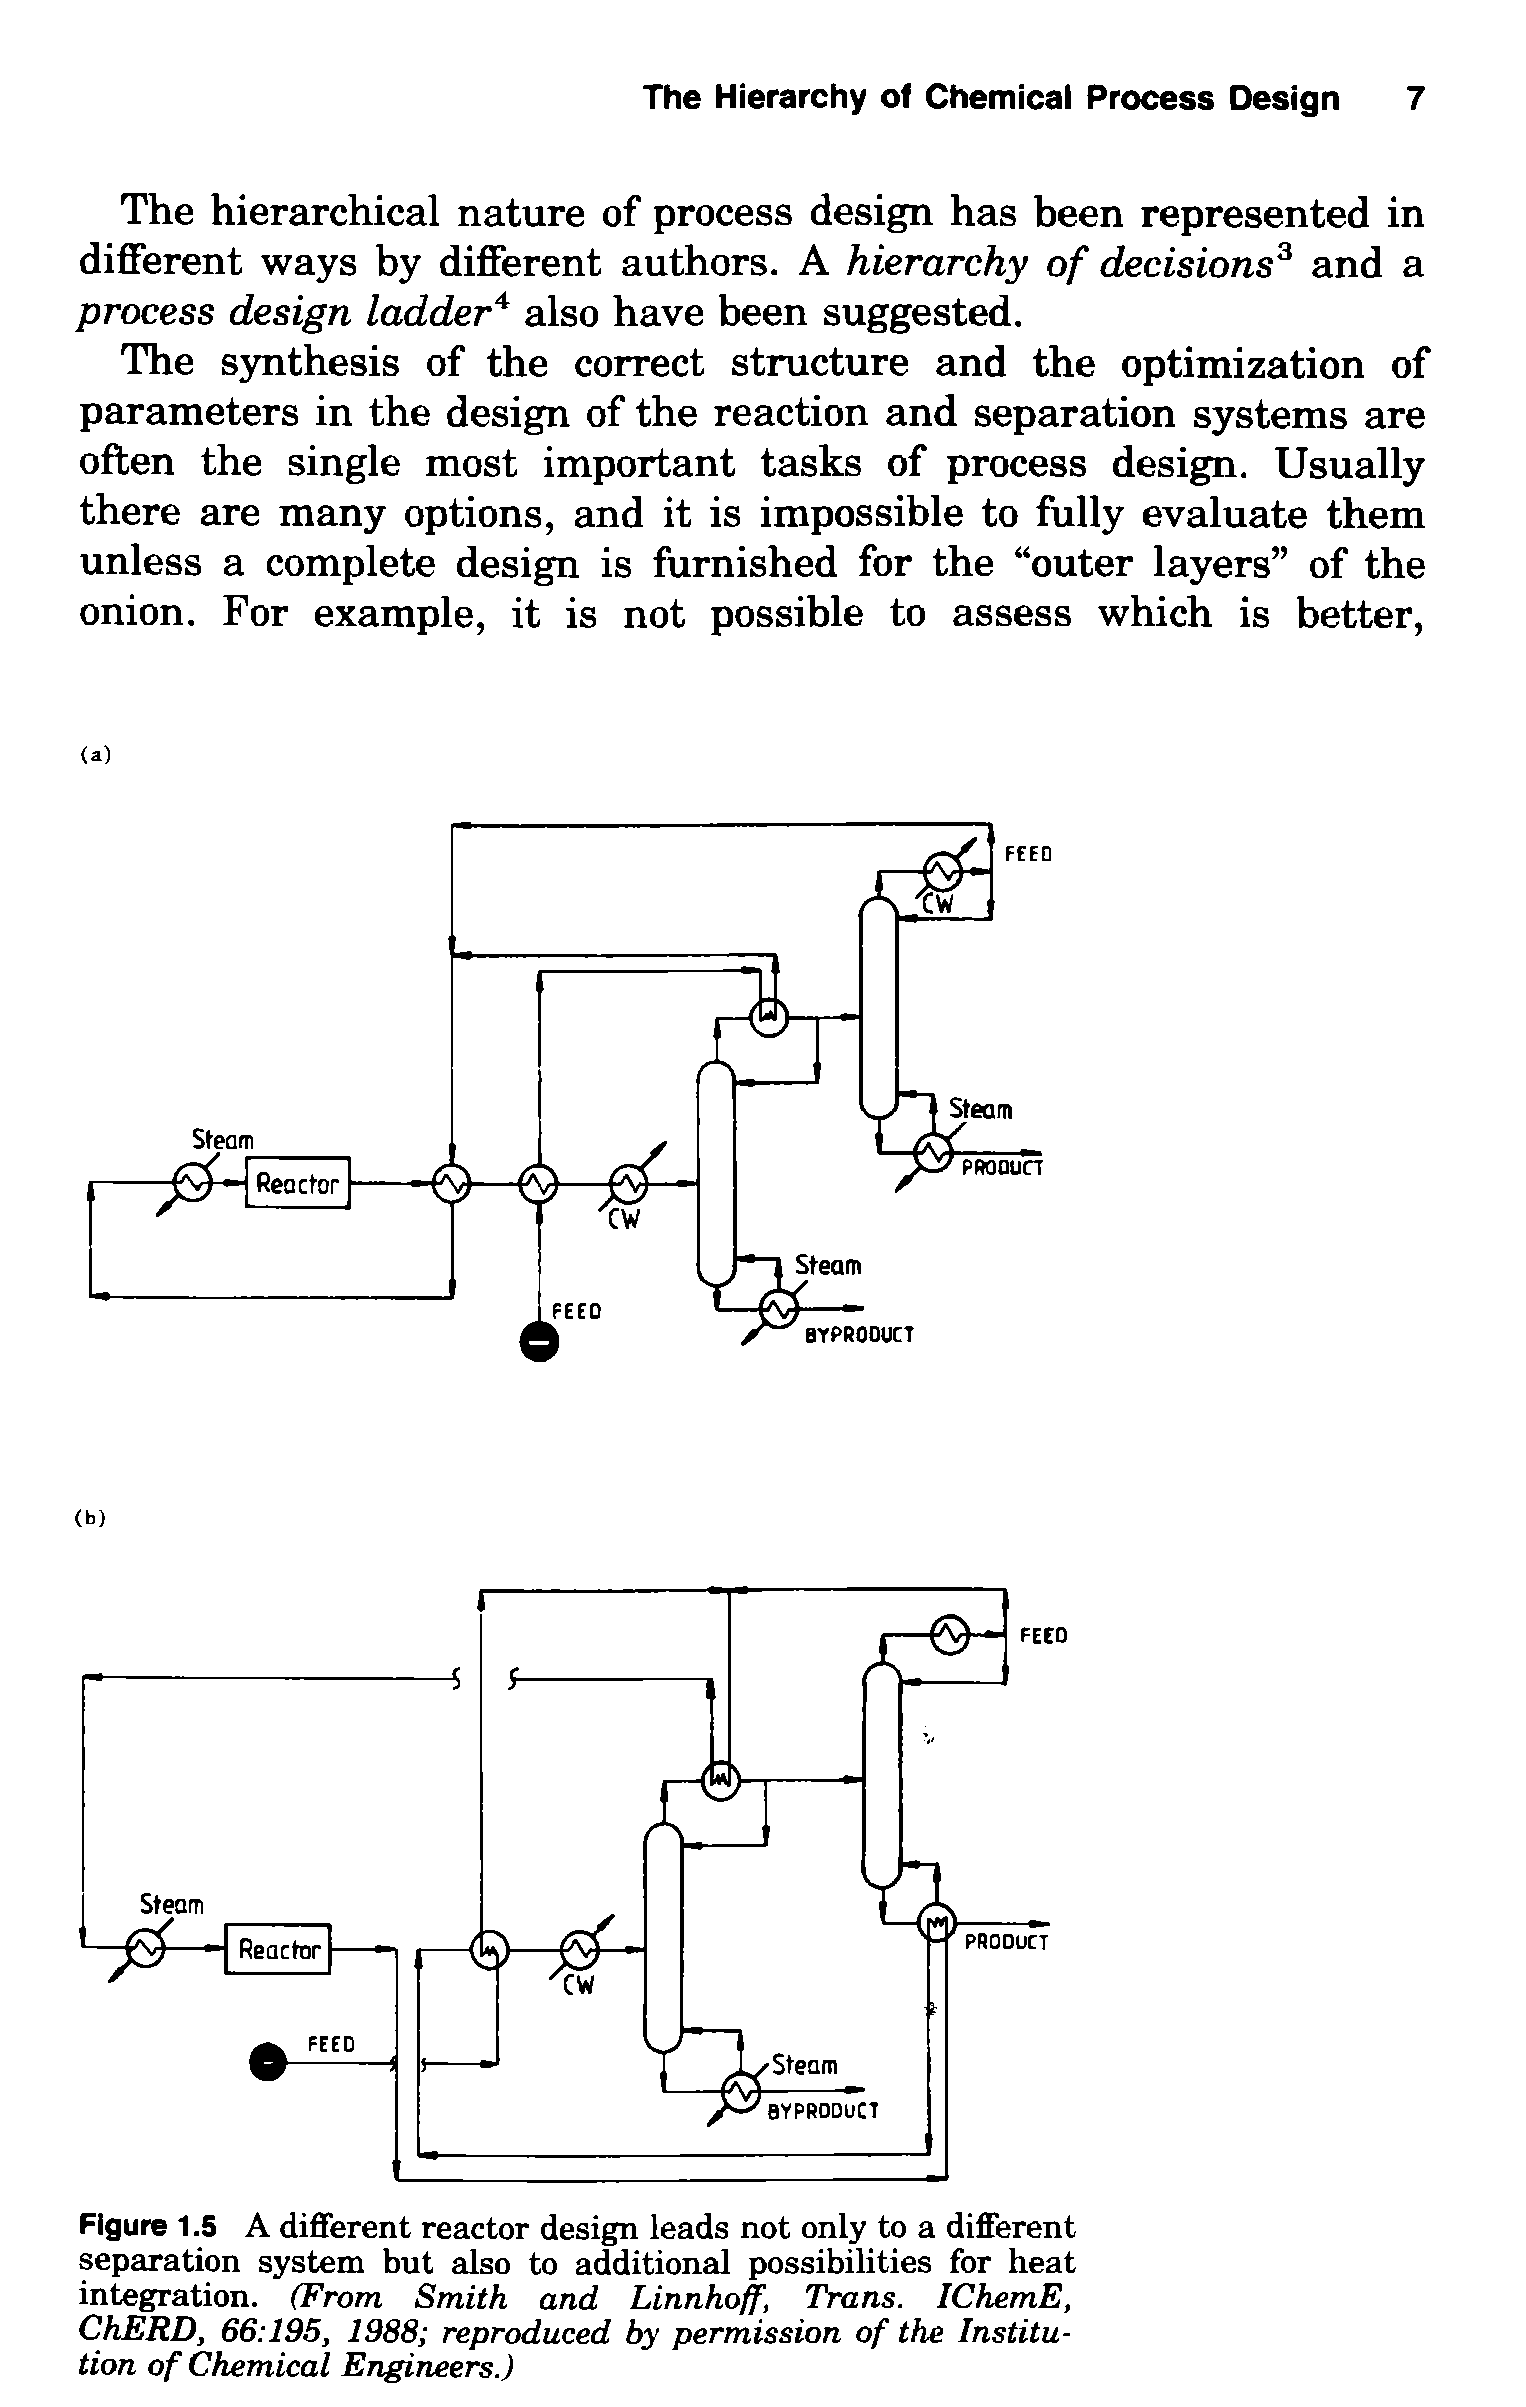 Figure 1.5 A different reactor design leads not only to a different separation system but also to additional possibilities for heat integration. (From Smith and Linnhoff, Trans. IChemE, ChERD, 66 195, 1988 reproduced by permission of the Institution of Chemical Engineers.)...